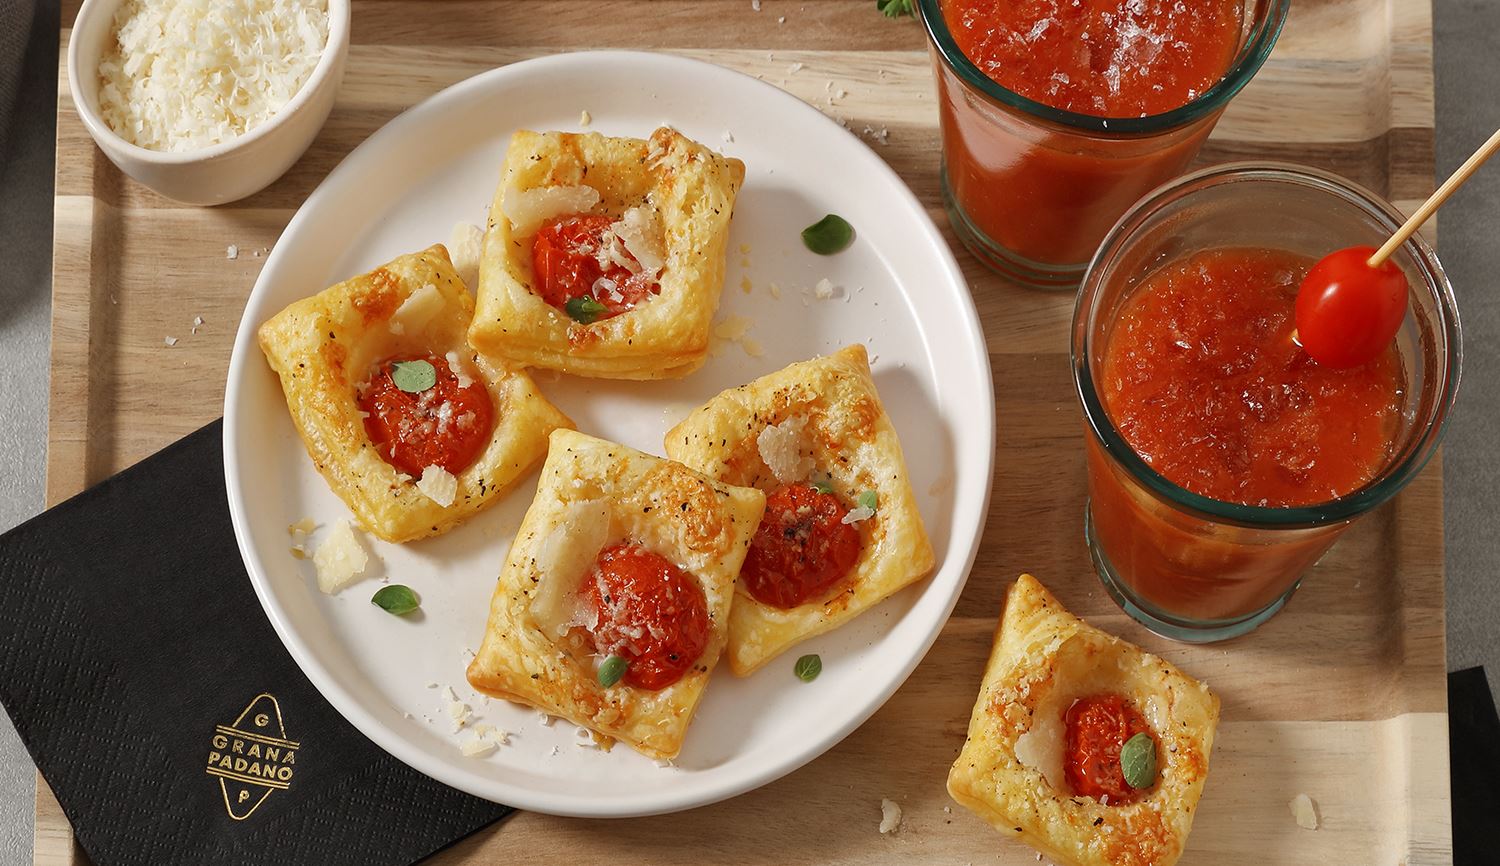 Non-alcoholic Tomato Cocktail served with Puff Pastry Snacks filled with Cherry Tomatoes, Oregano and Grana Padano Riserva